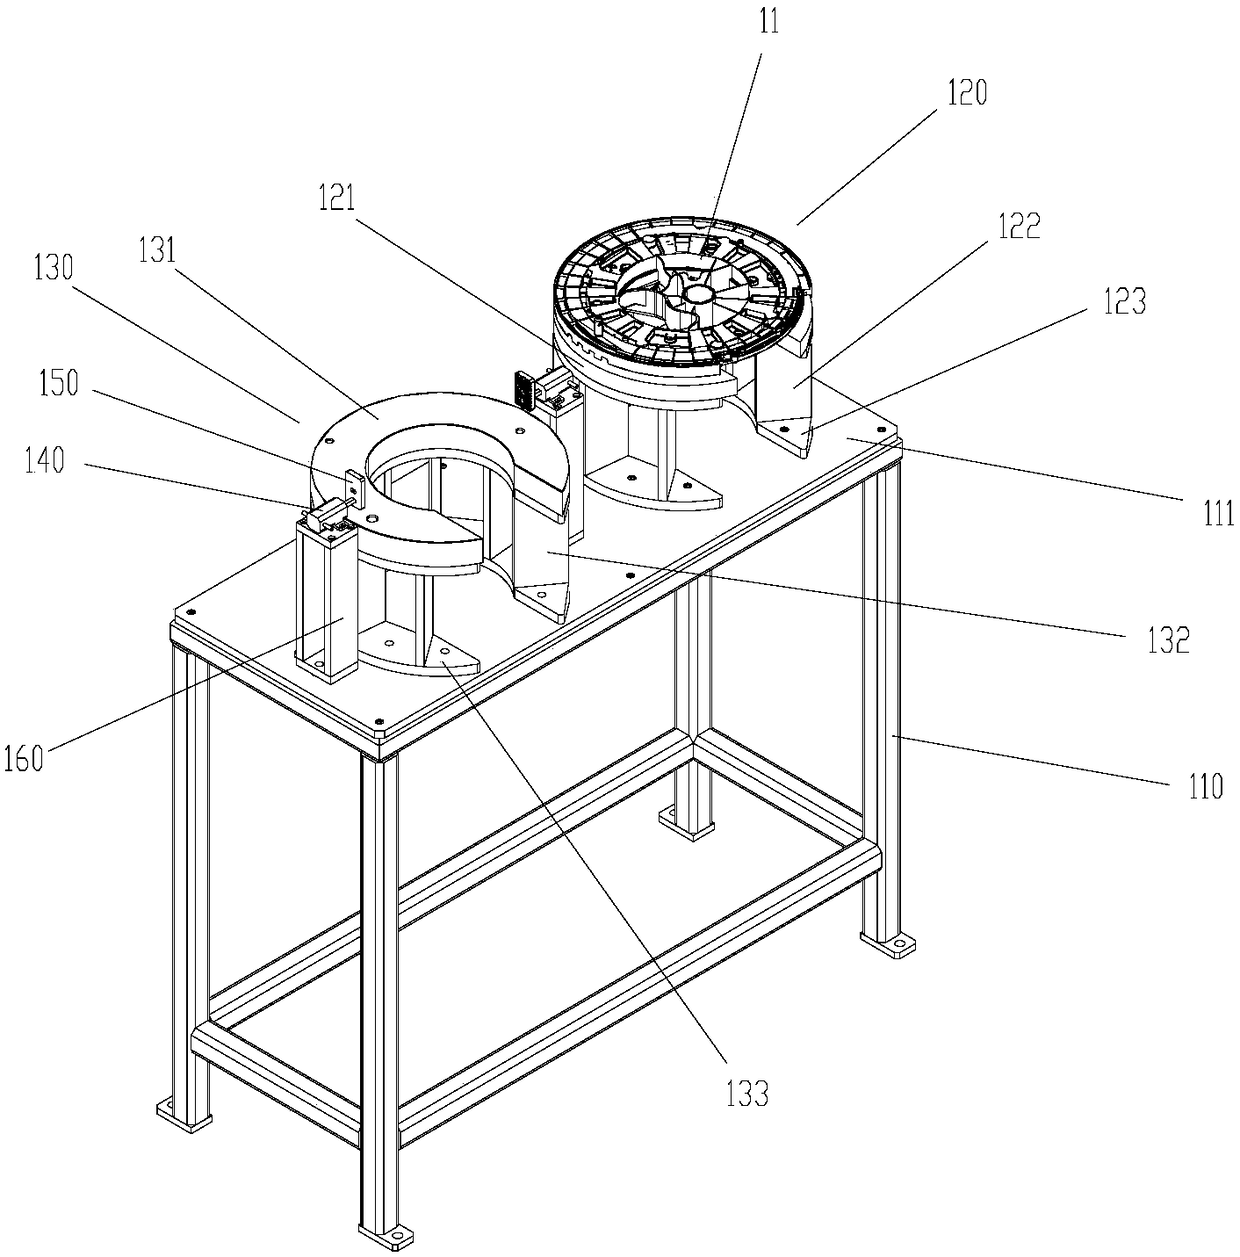 Bearing assembly equipment